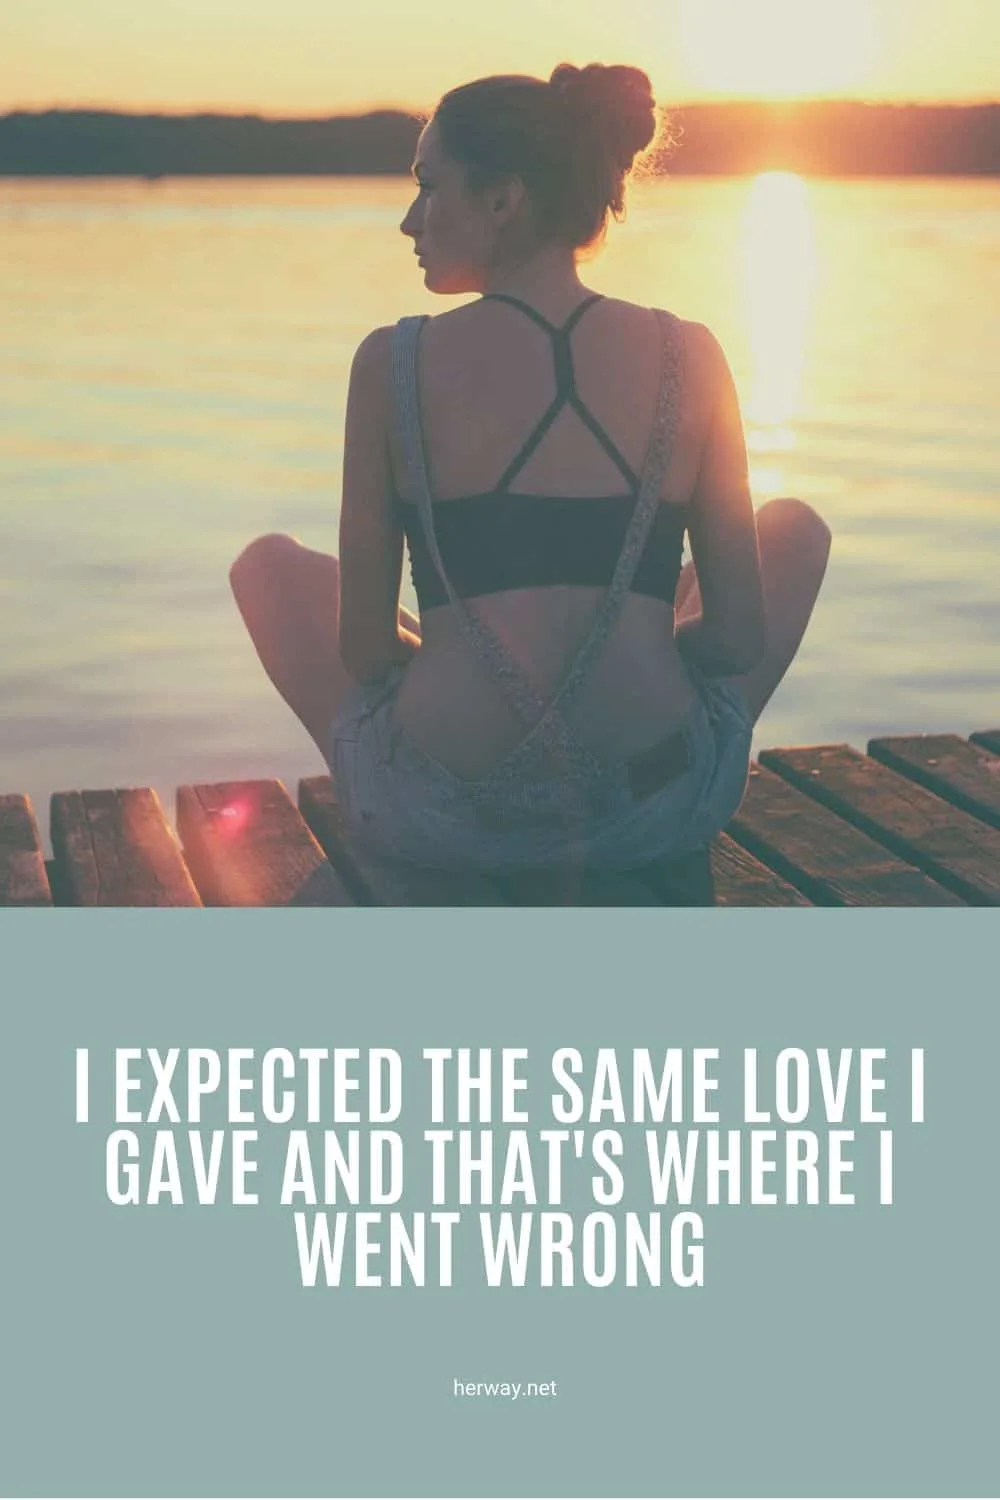 I Expected The Same Love I Gave And That's Where I Went Wrong